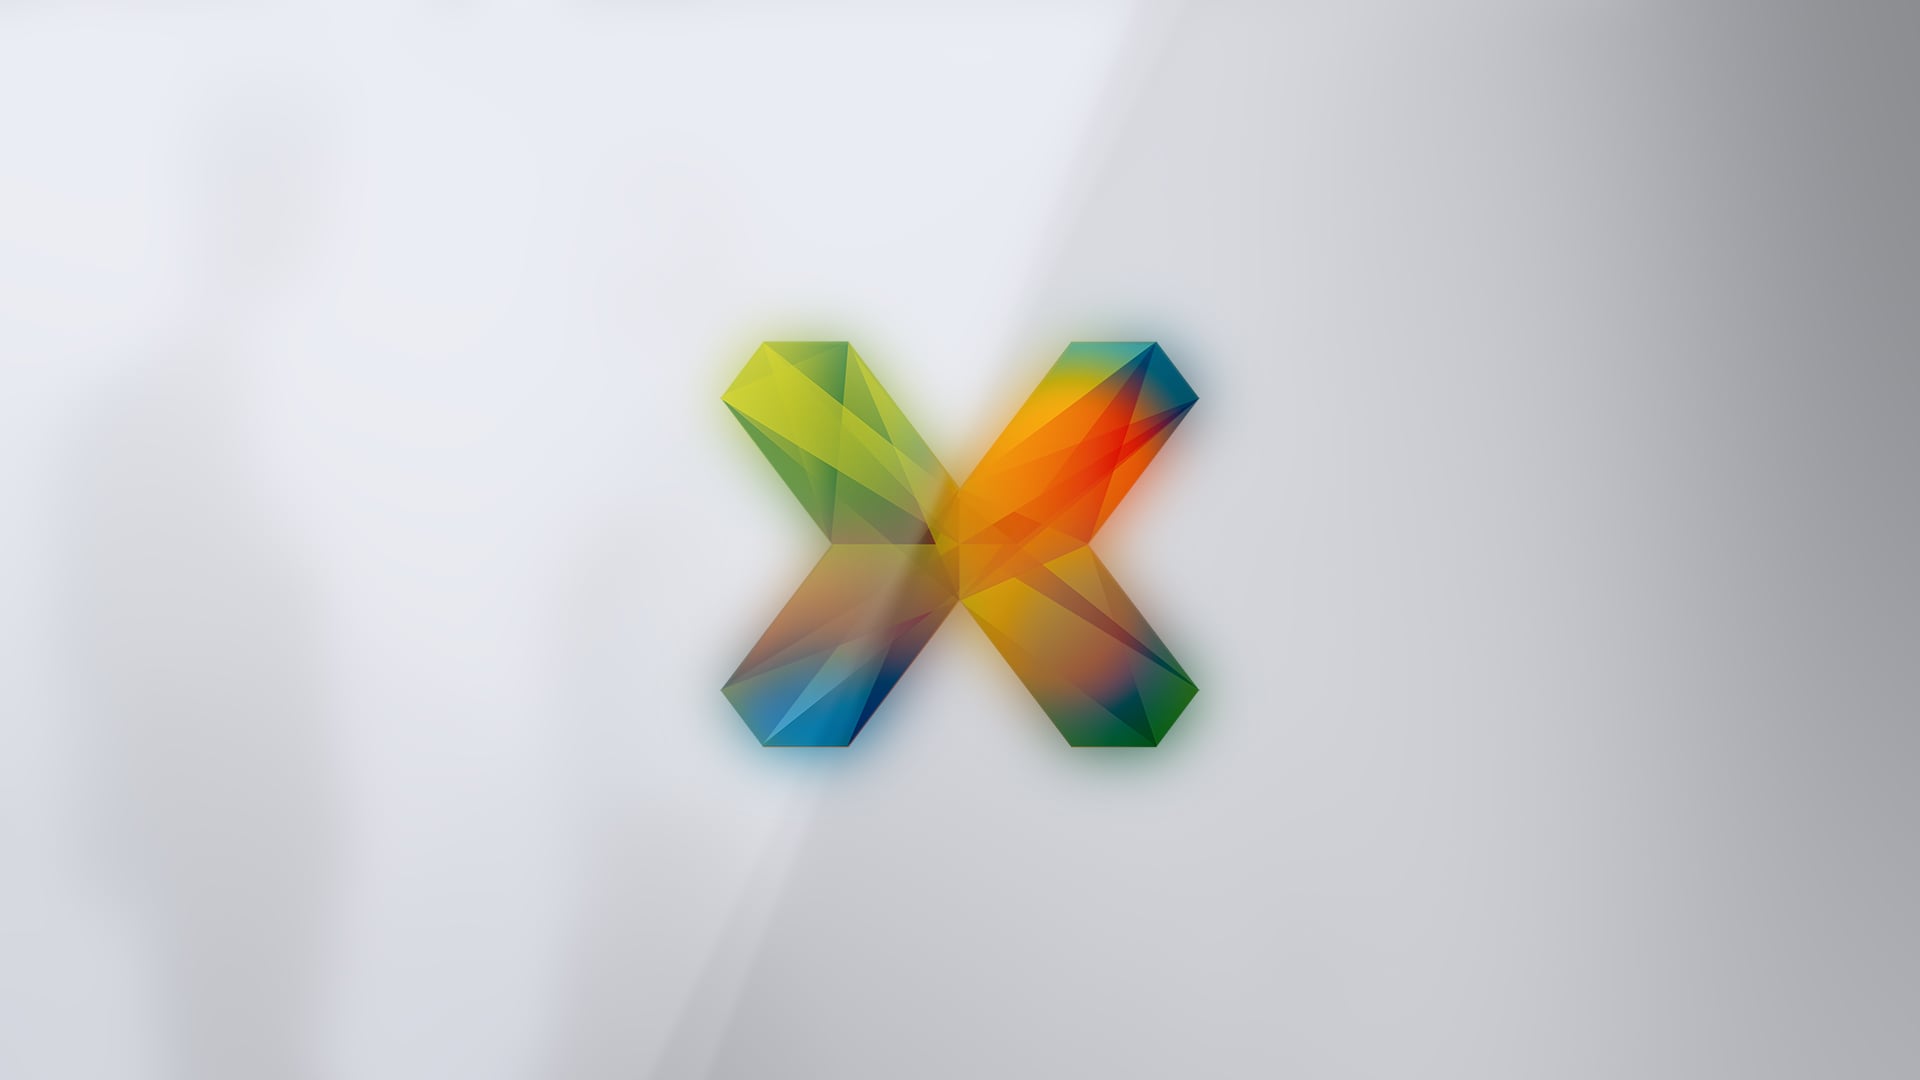 X-Net connects people and disciplines